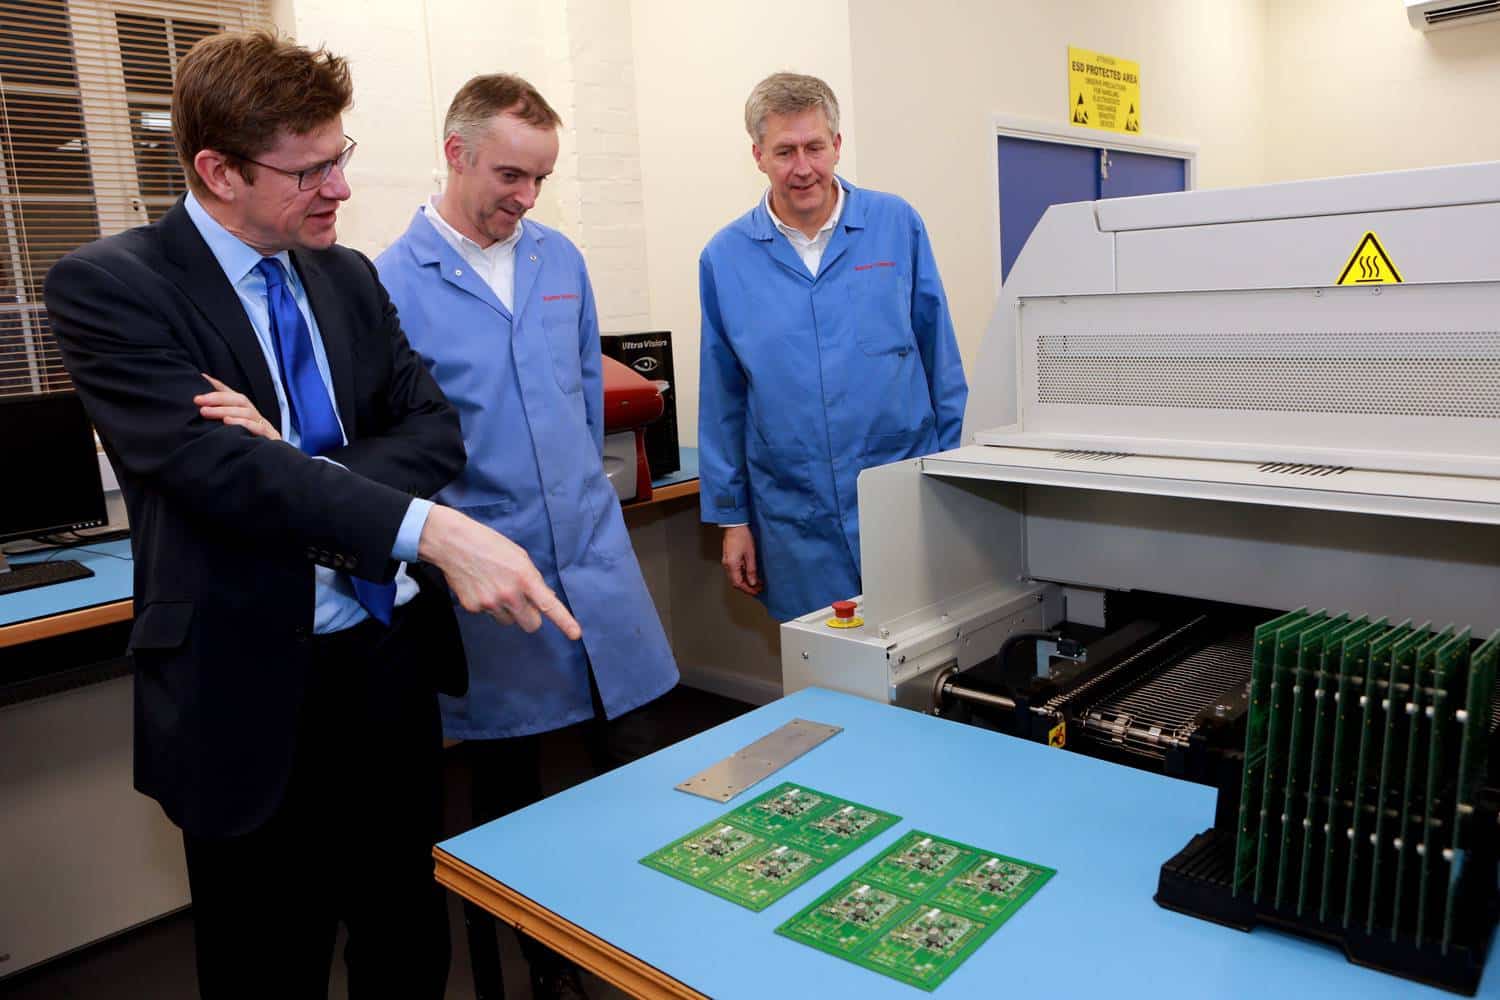 Industry minister visits tech firm in his own back yard